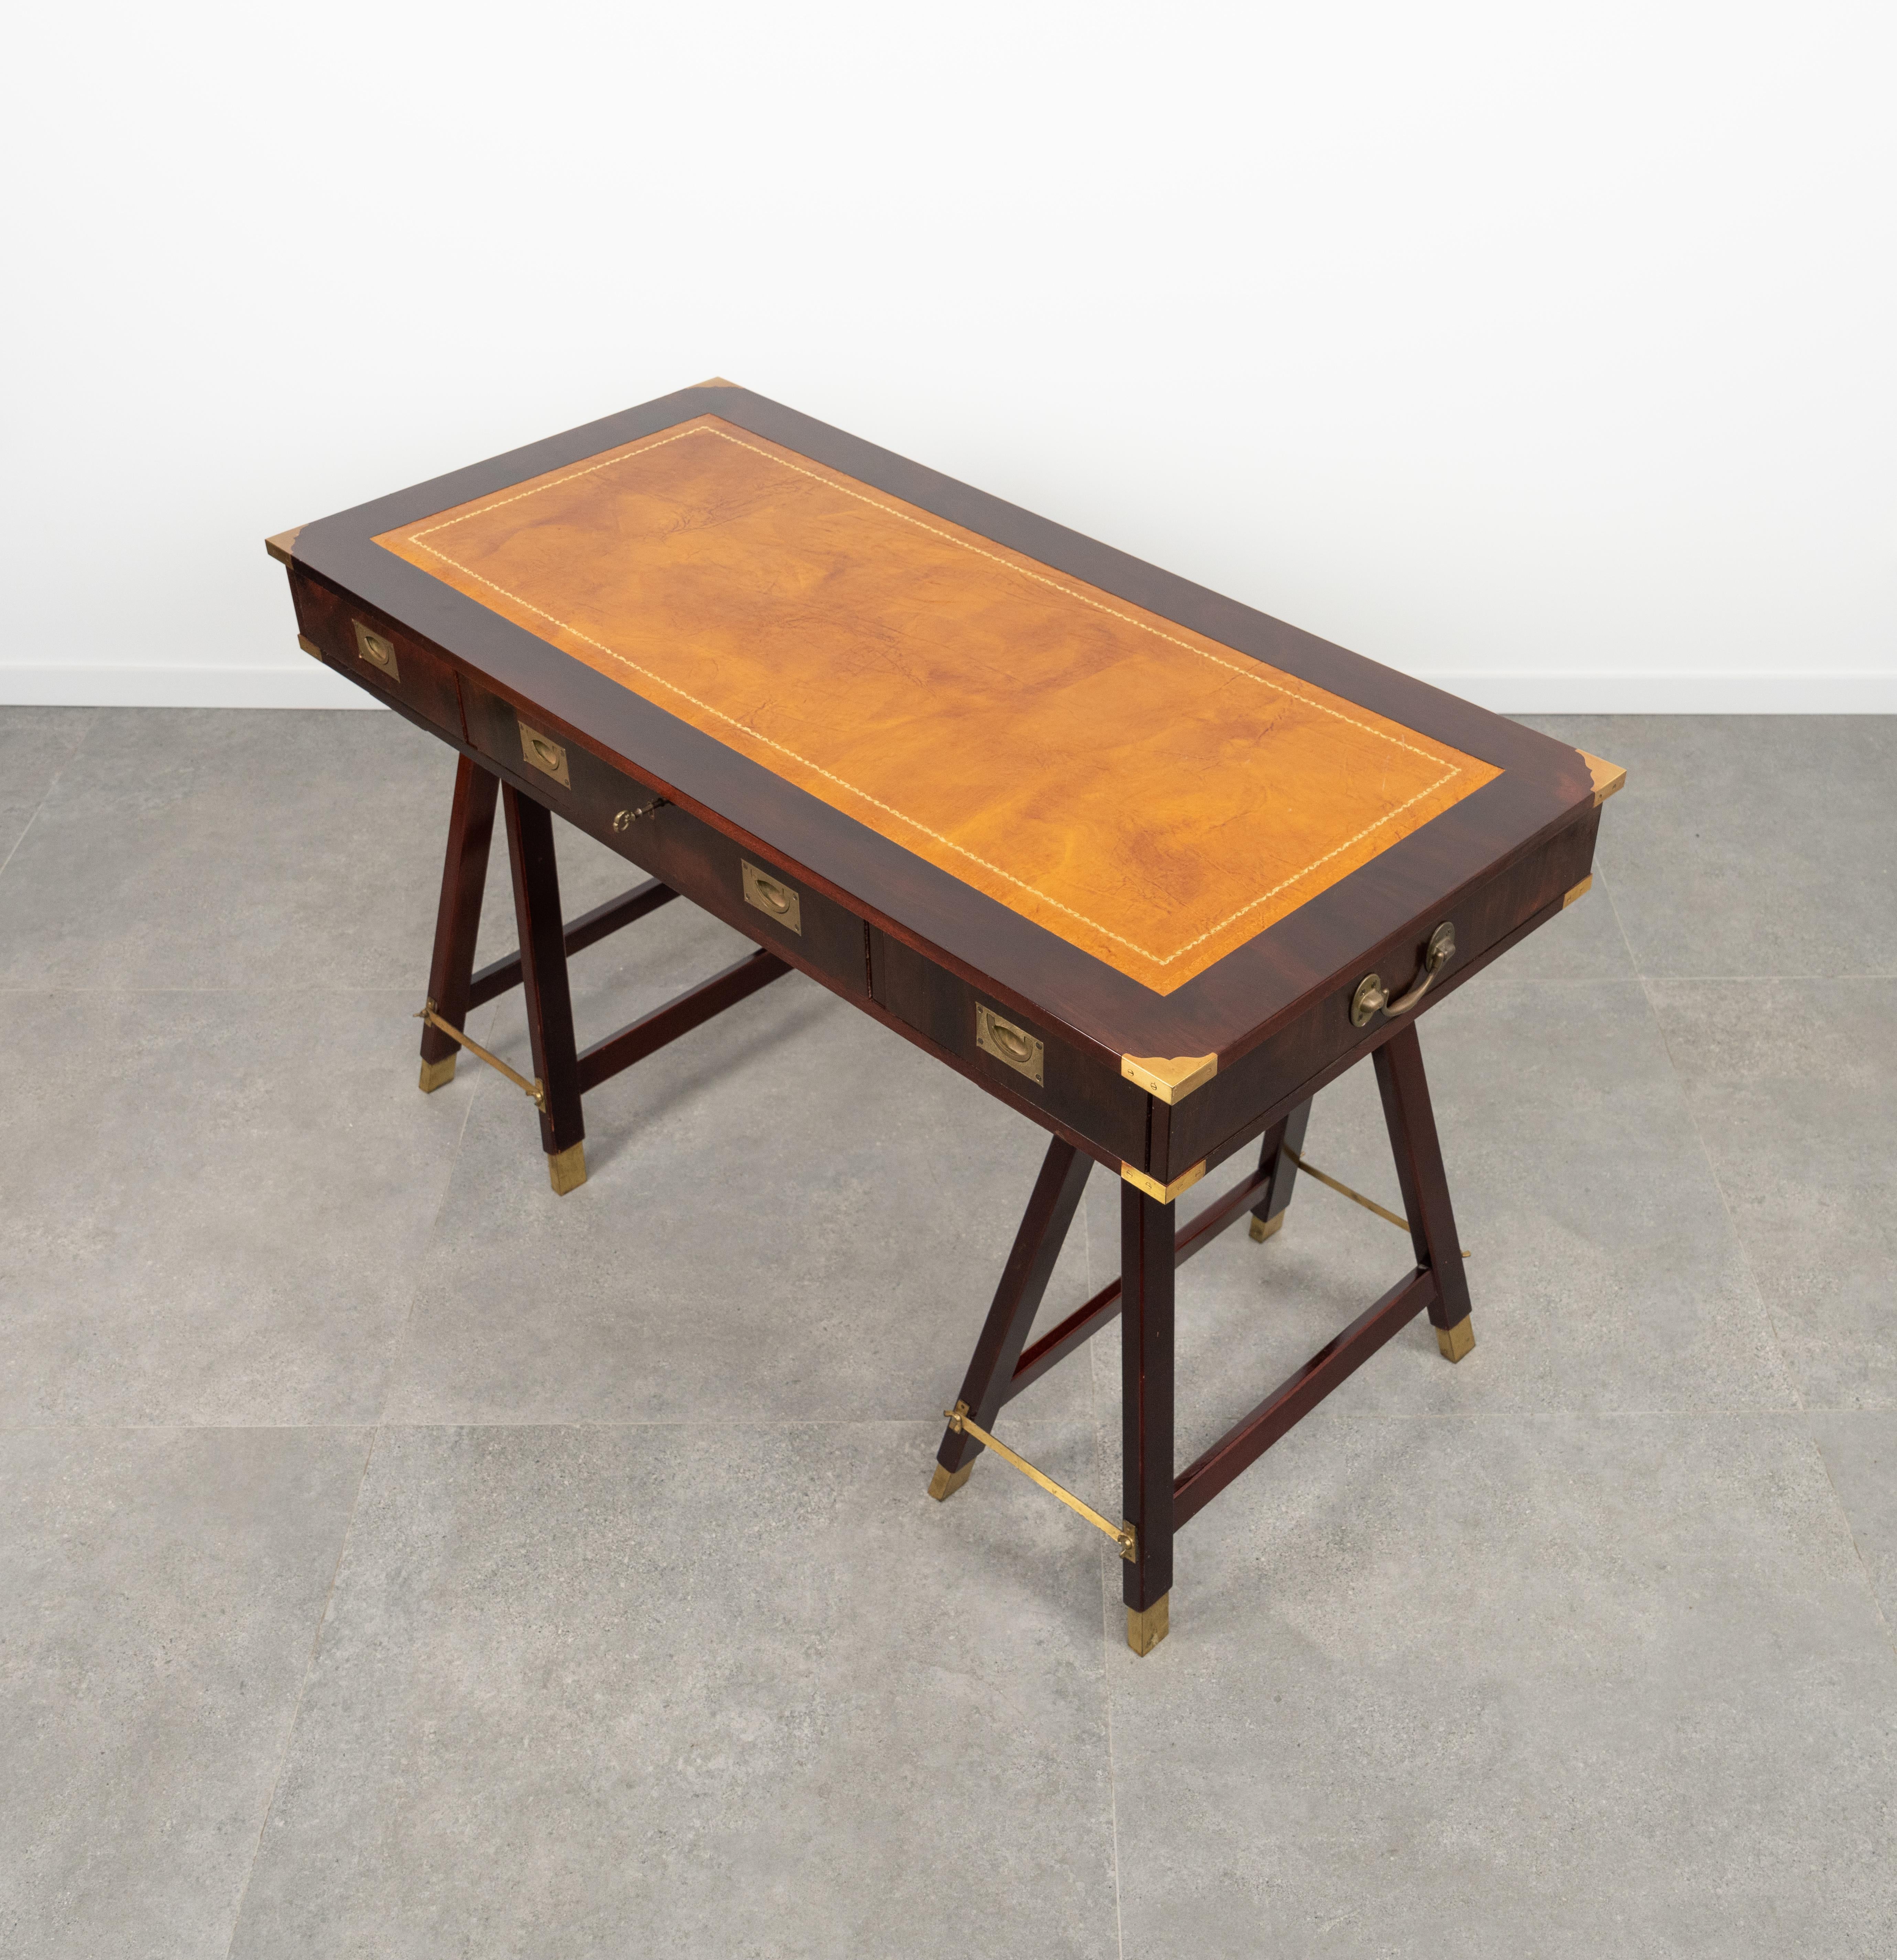 Military Campaign Style Desk Table in Wood, Brass and Leather, Italy 1960s For Sale 7